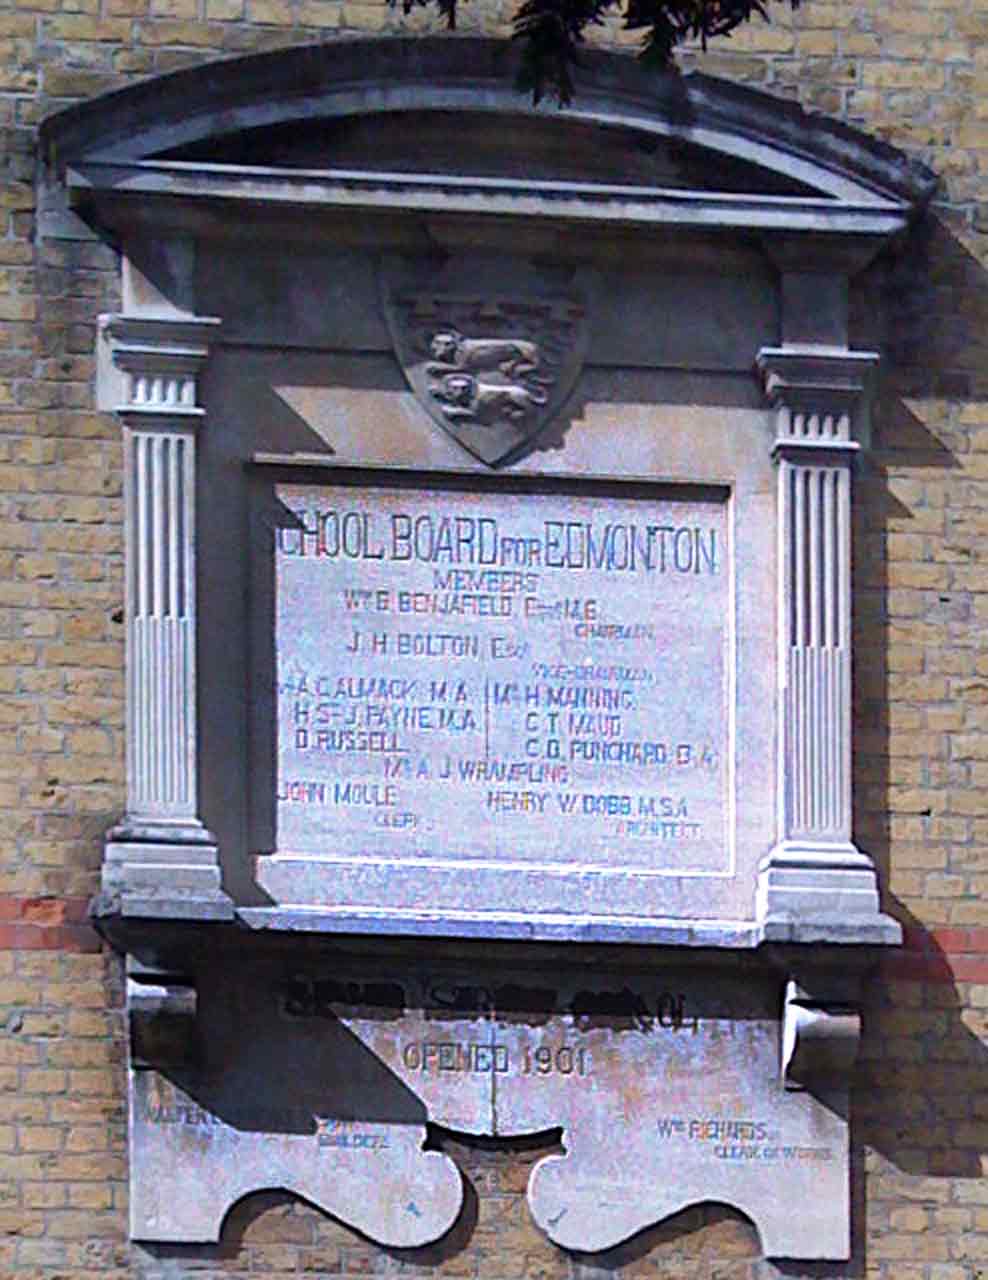 Plaque commemorating the opening of Silver Street School in 1901